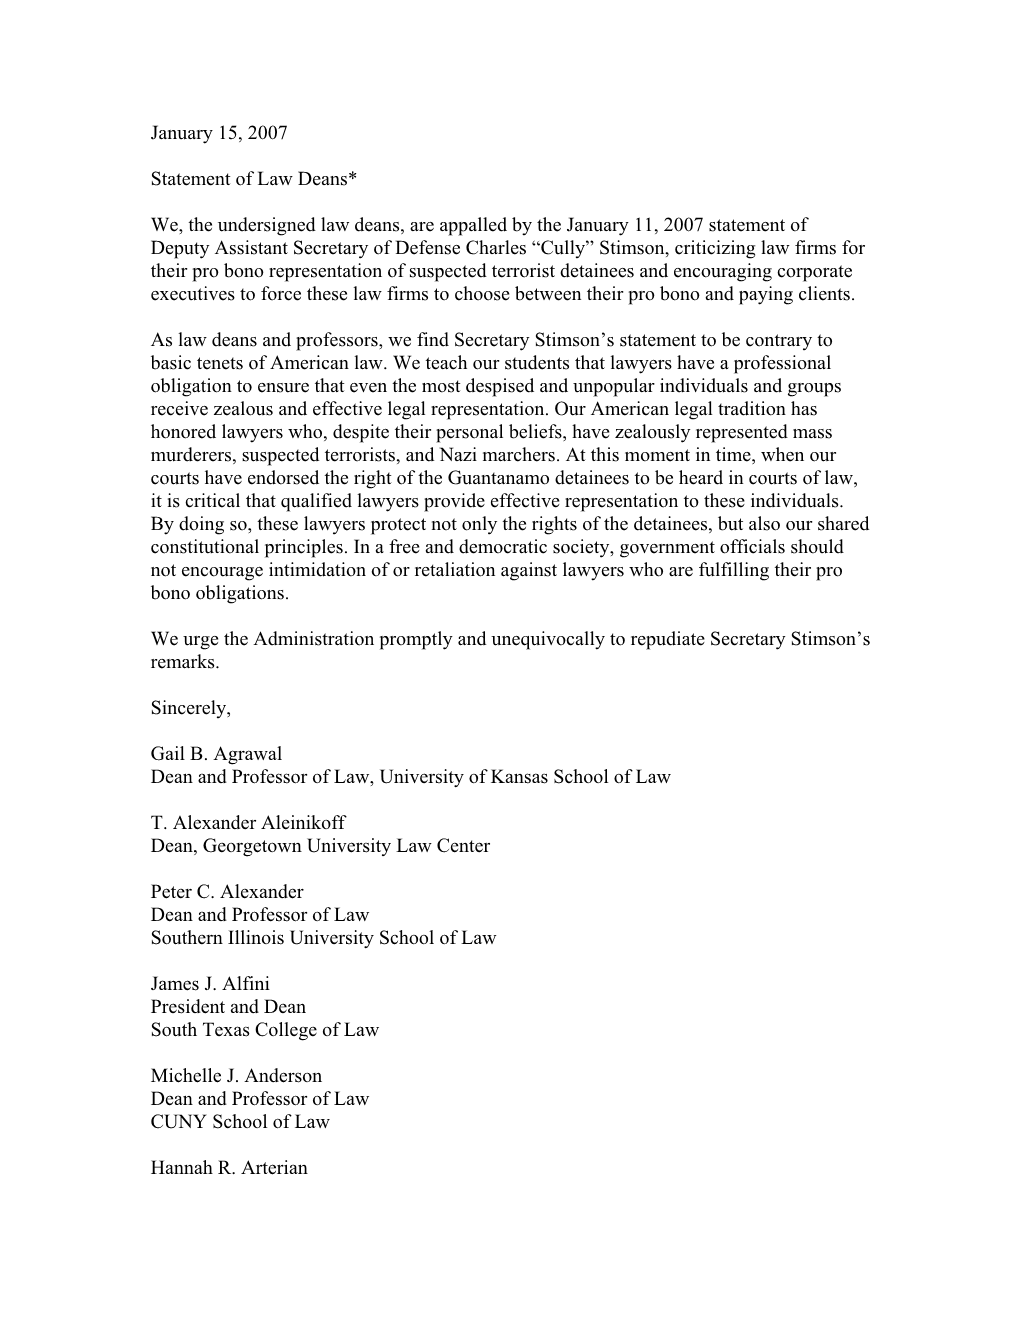 Law Deans' Release Statement on Remarks of Cully Stimson Regarding Lawyers for Detainees